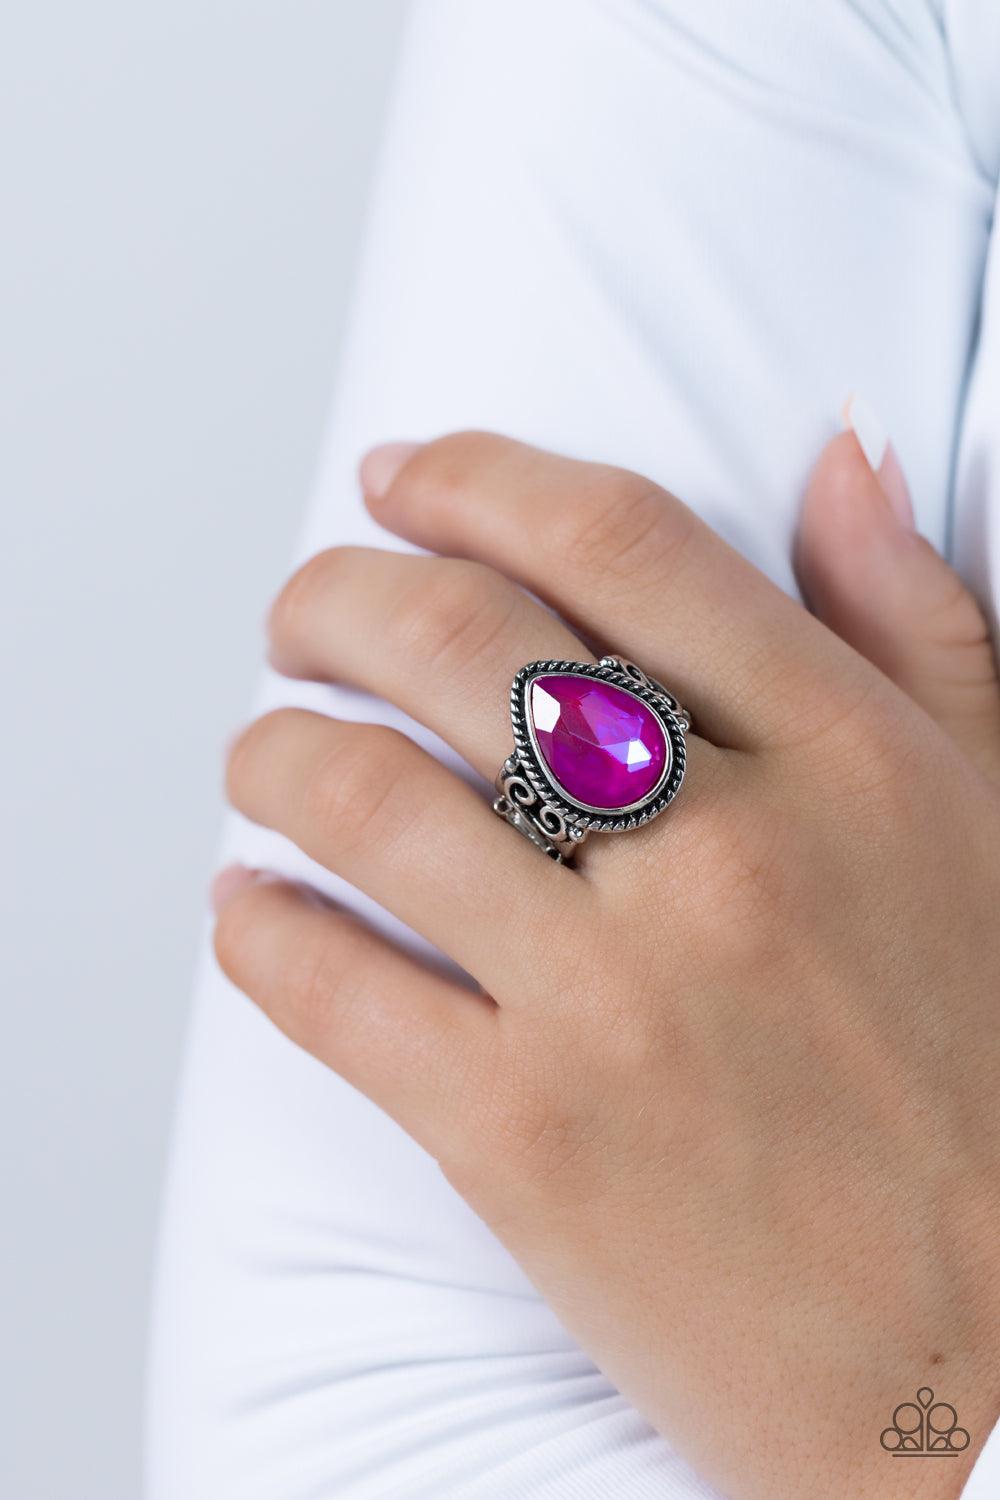 Paparazzi Accessories - Supernatural Sparkle - Pink Ring - Bling by JessieK